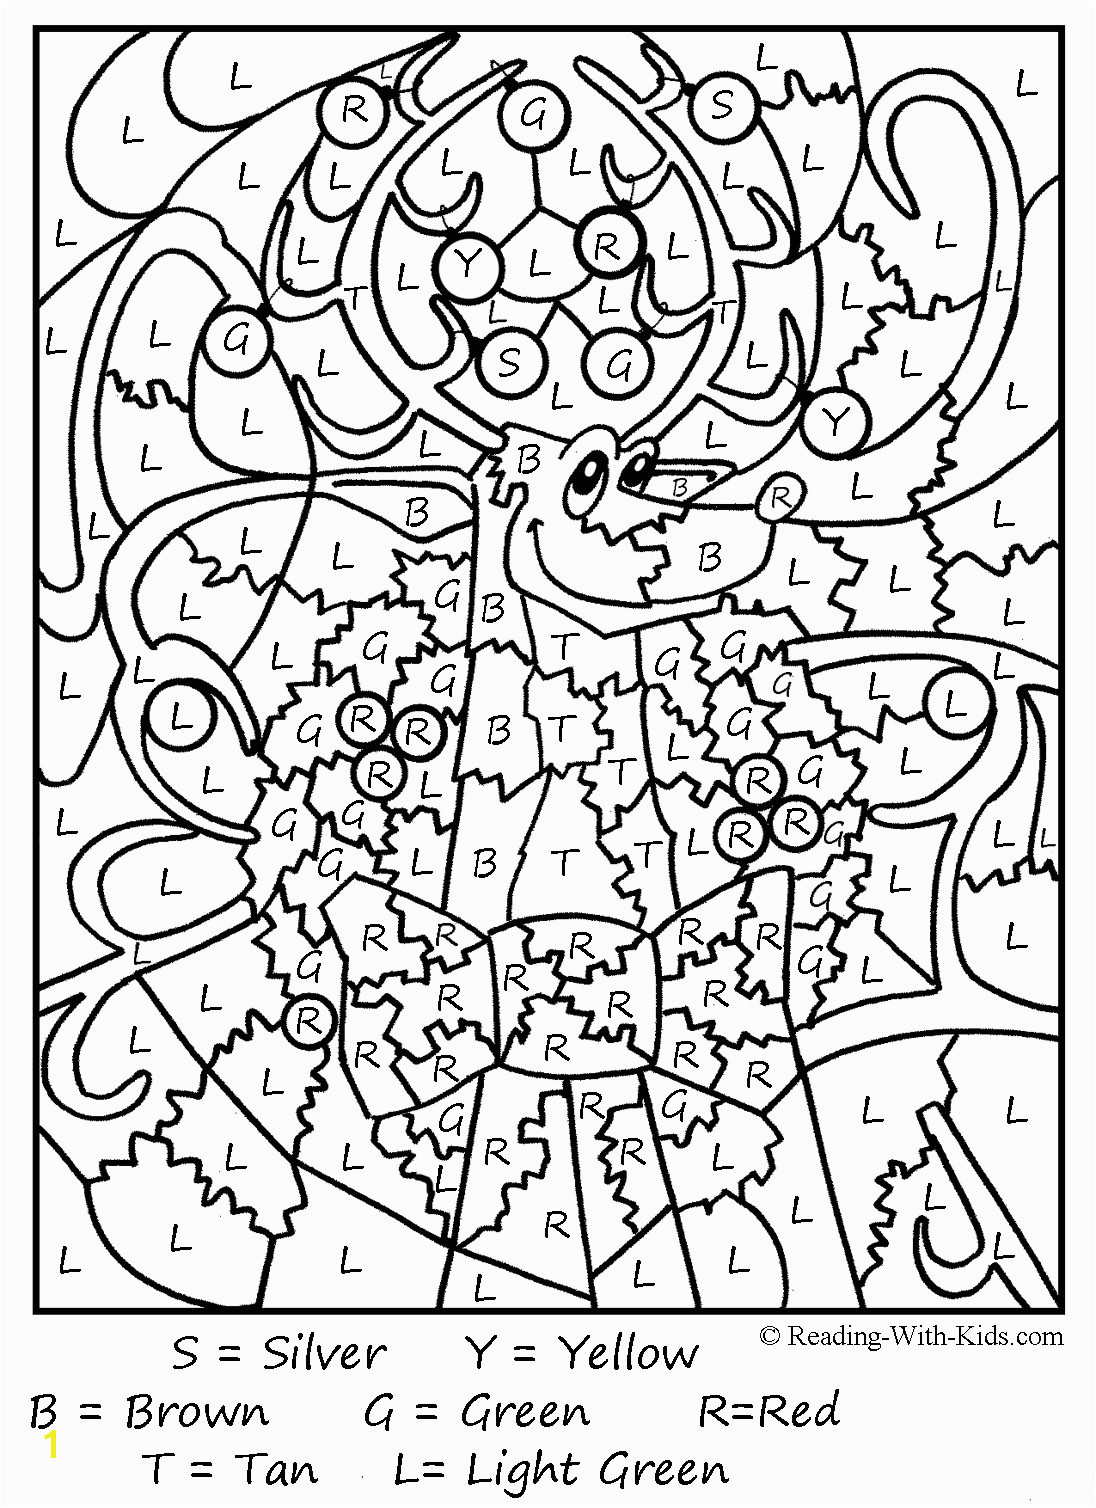 Difficult Color by Number Coloring Pages All Holiday Coloring Pages